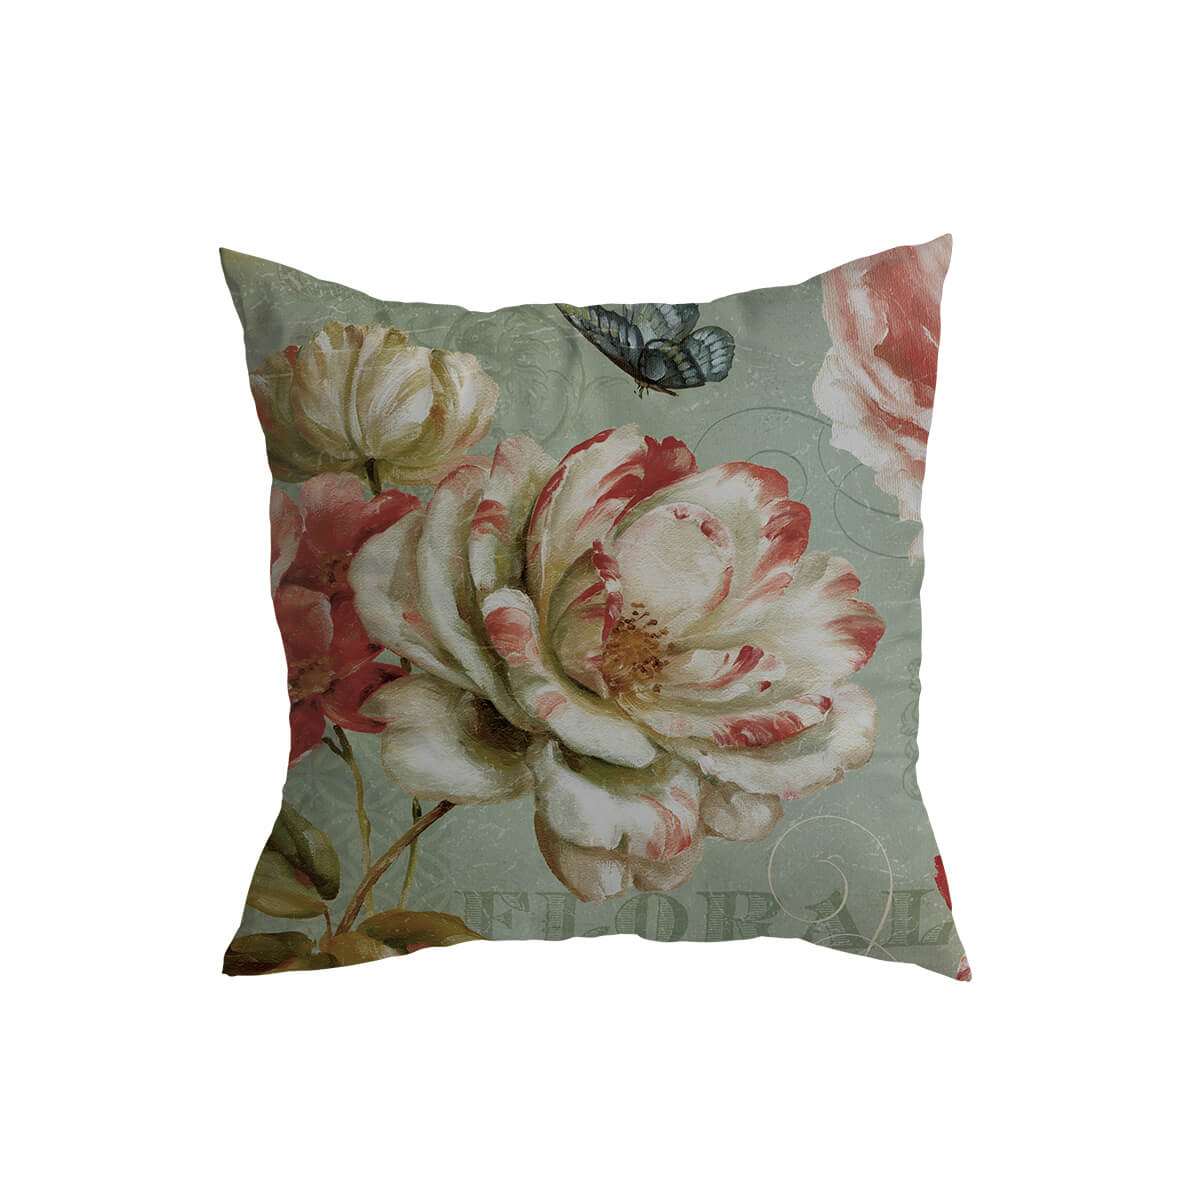 Vintage Spring Flowers Cushion Covers